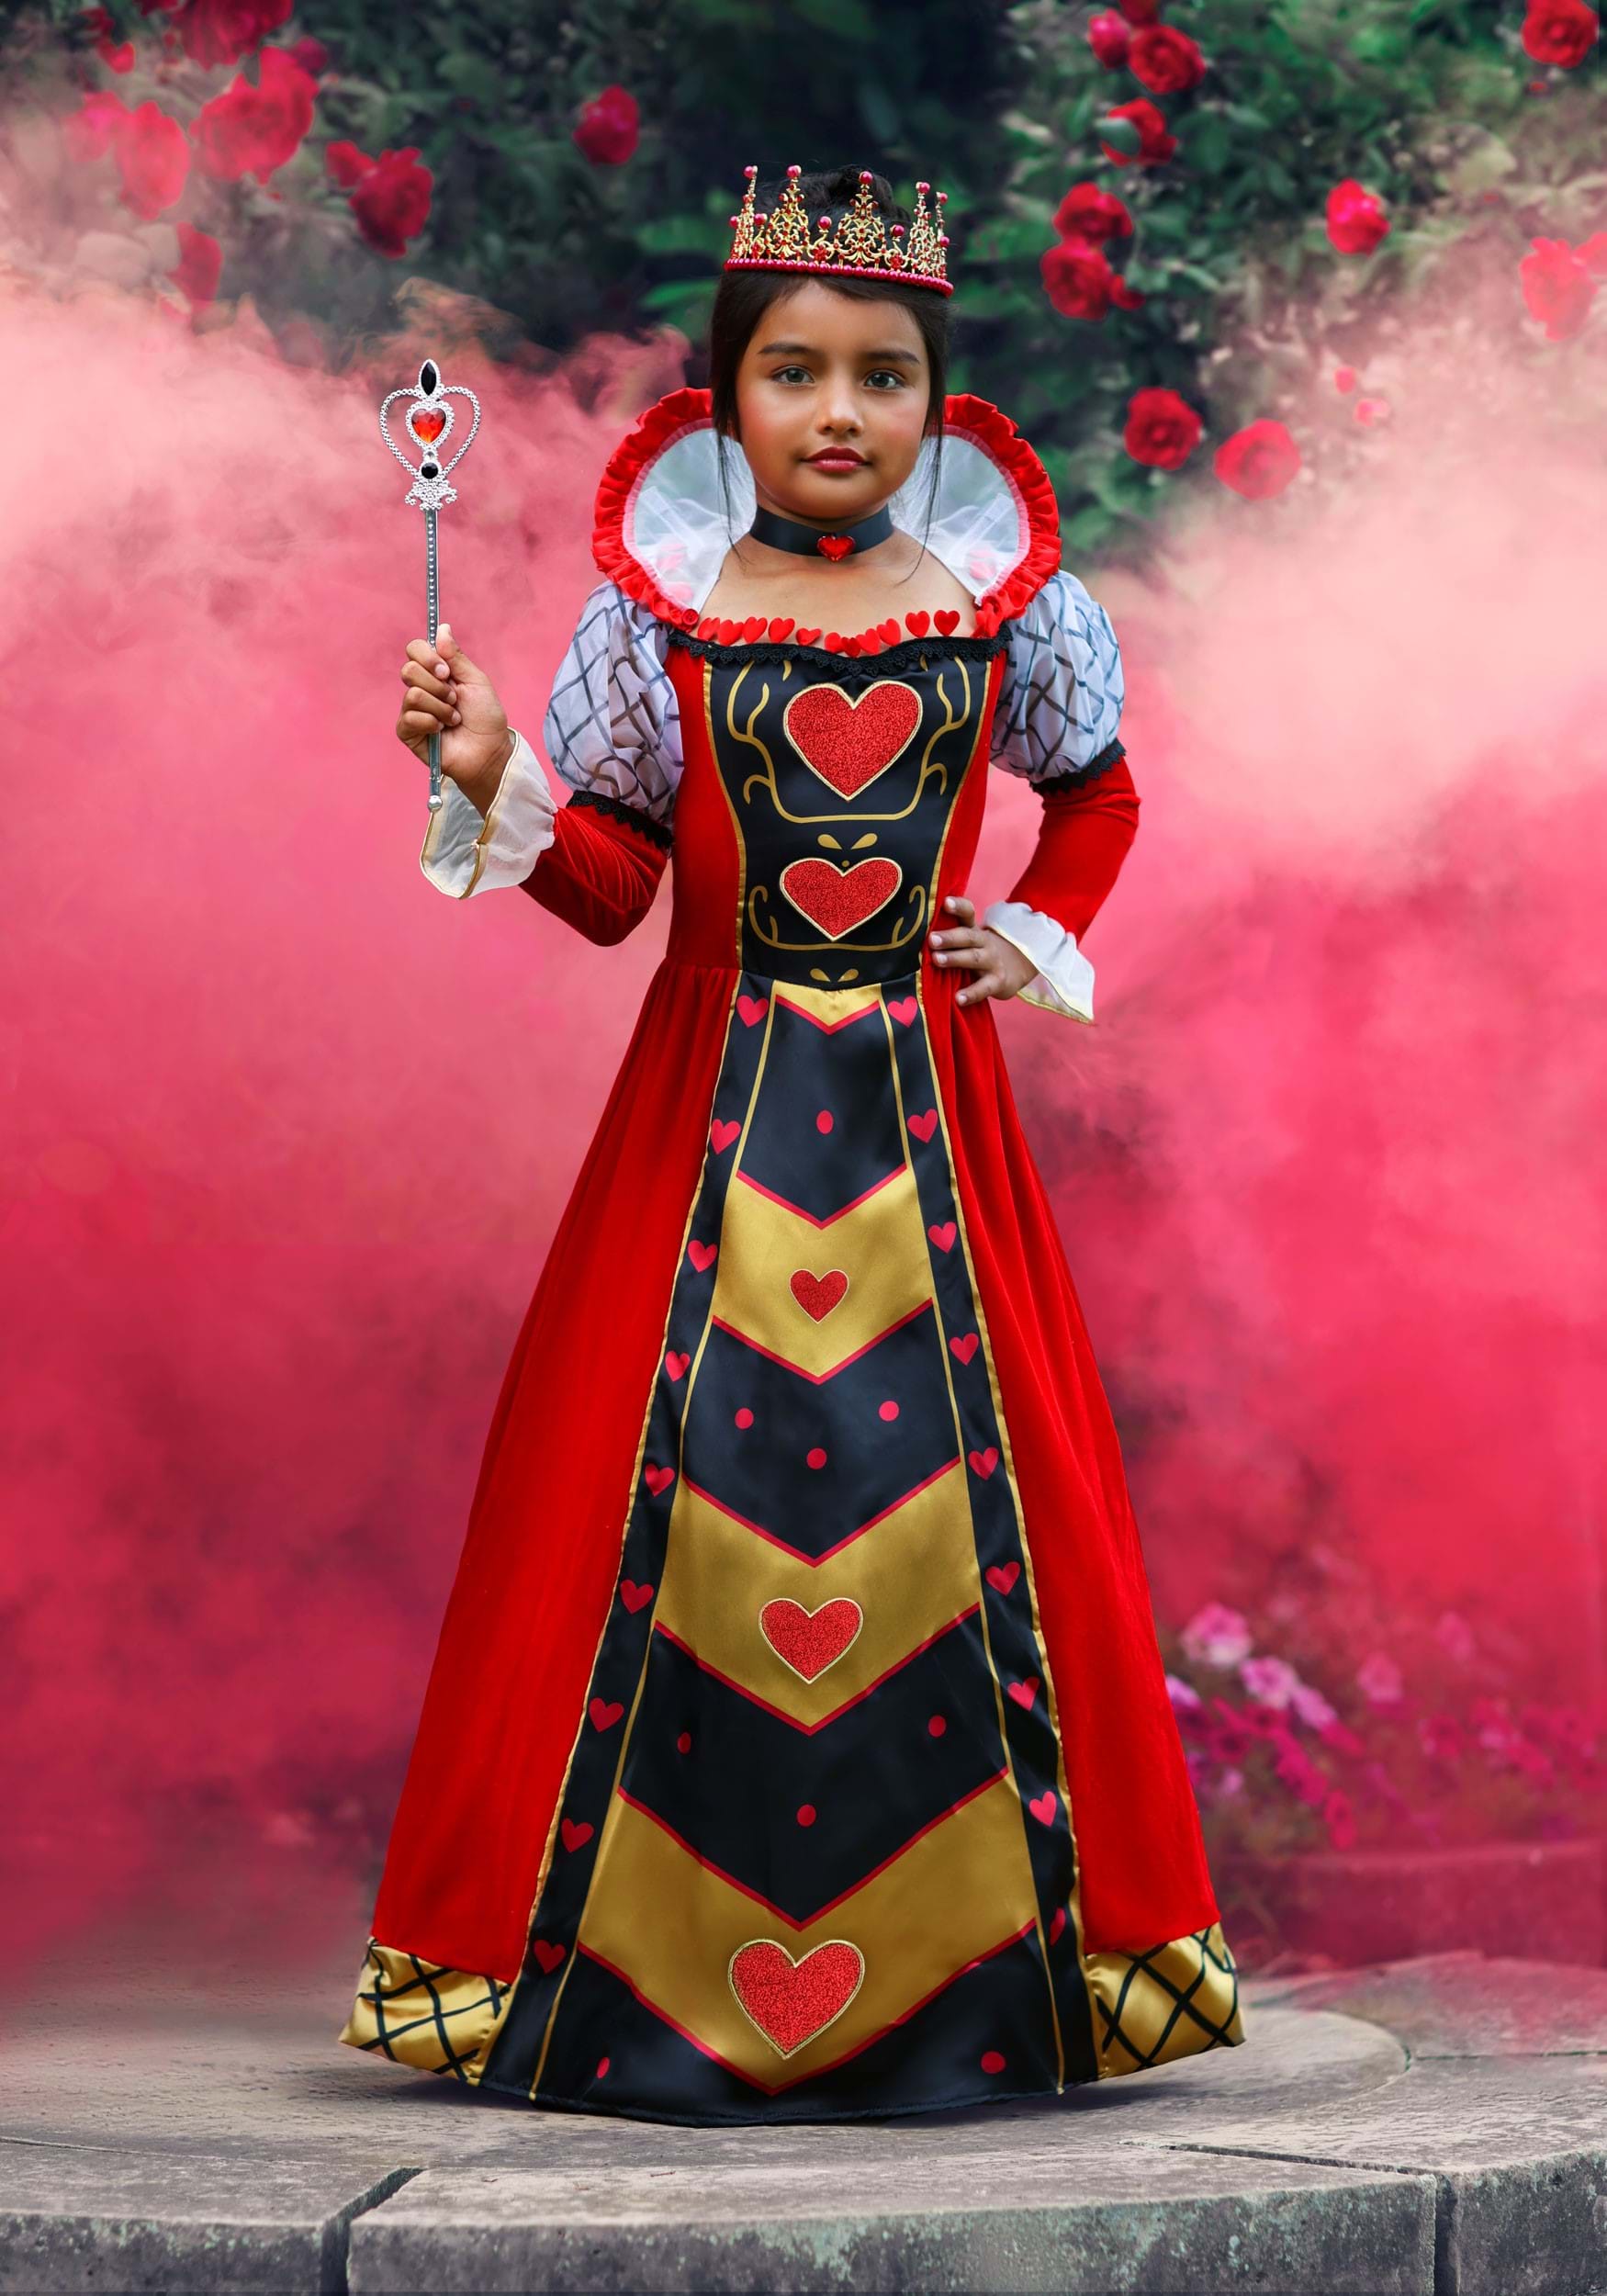 All That Glitters  Queen of hearts costume, Card costume, Heart